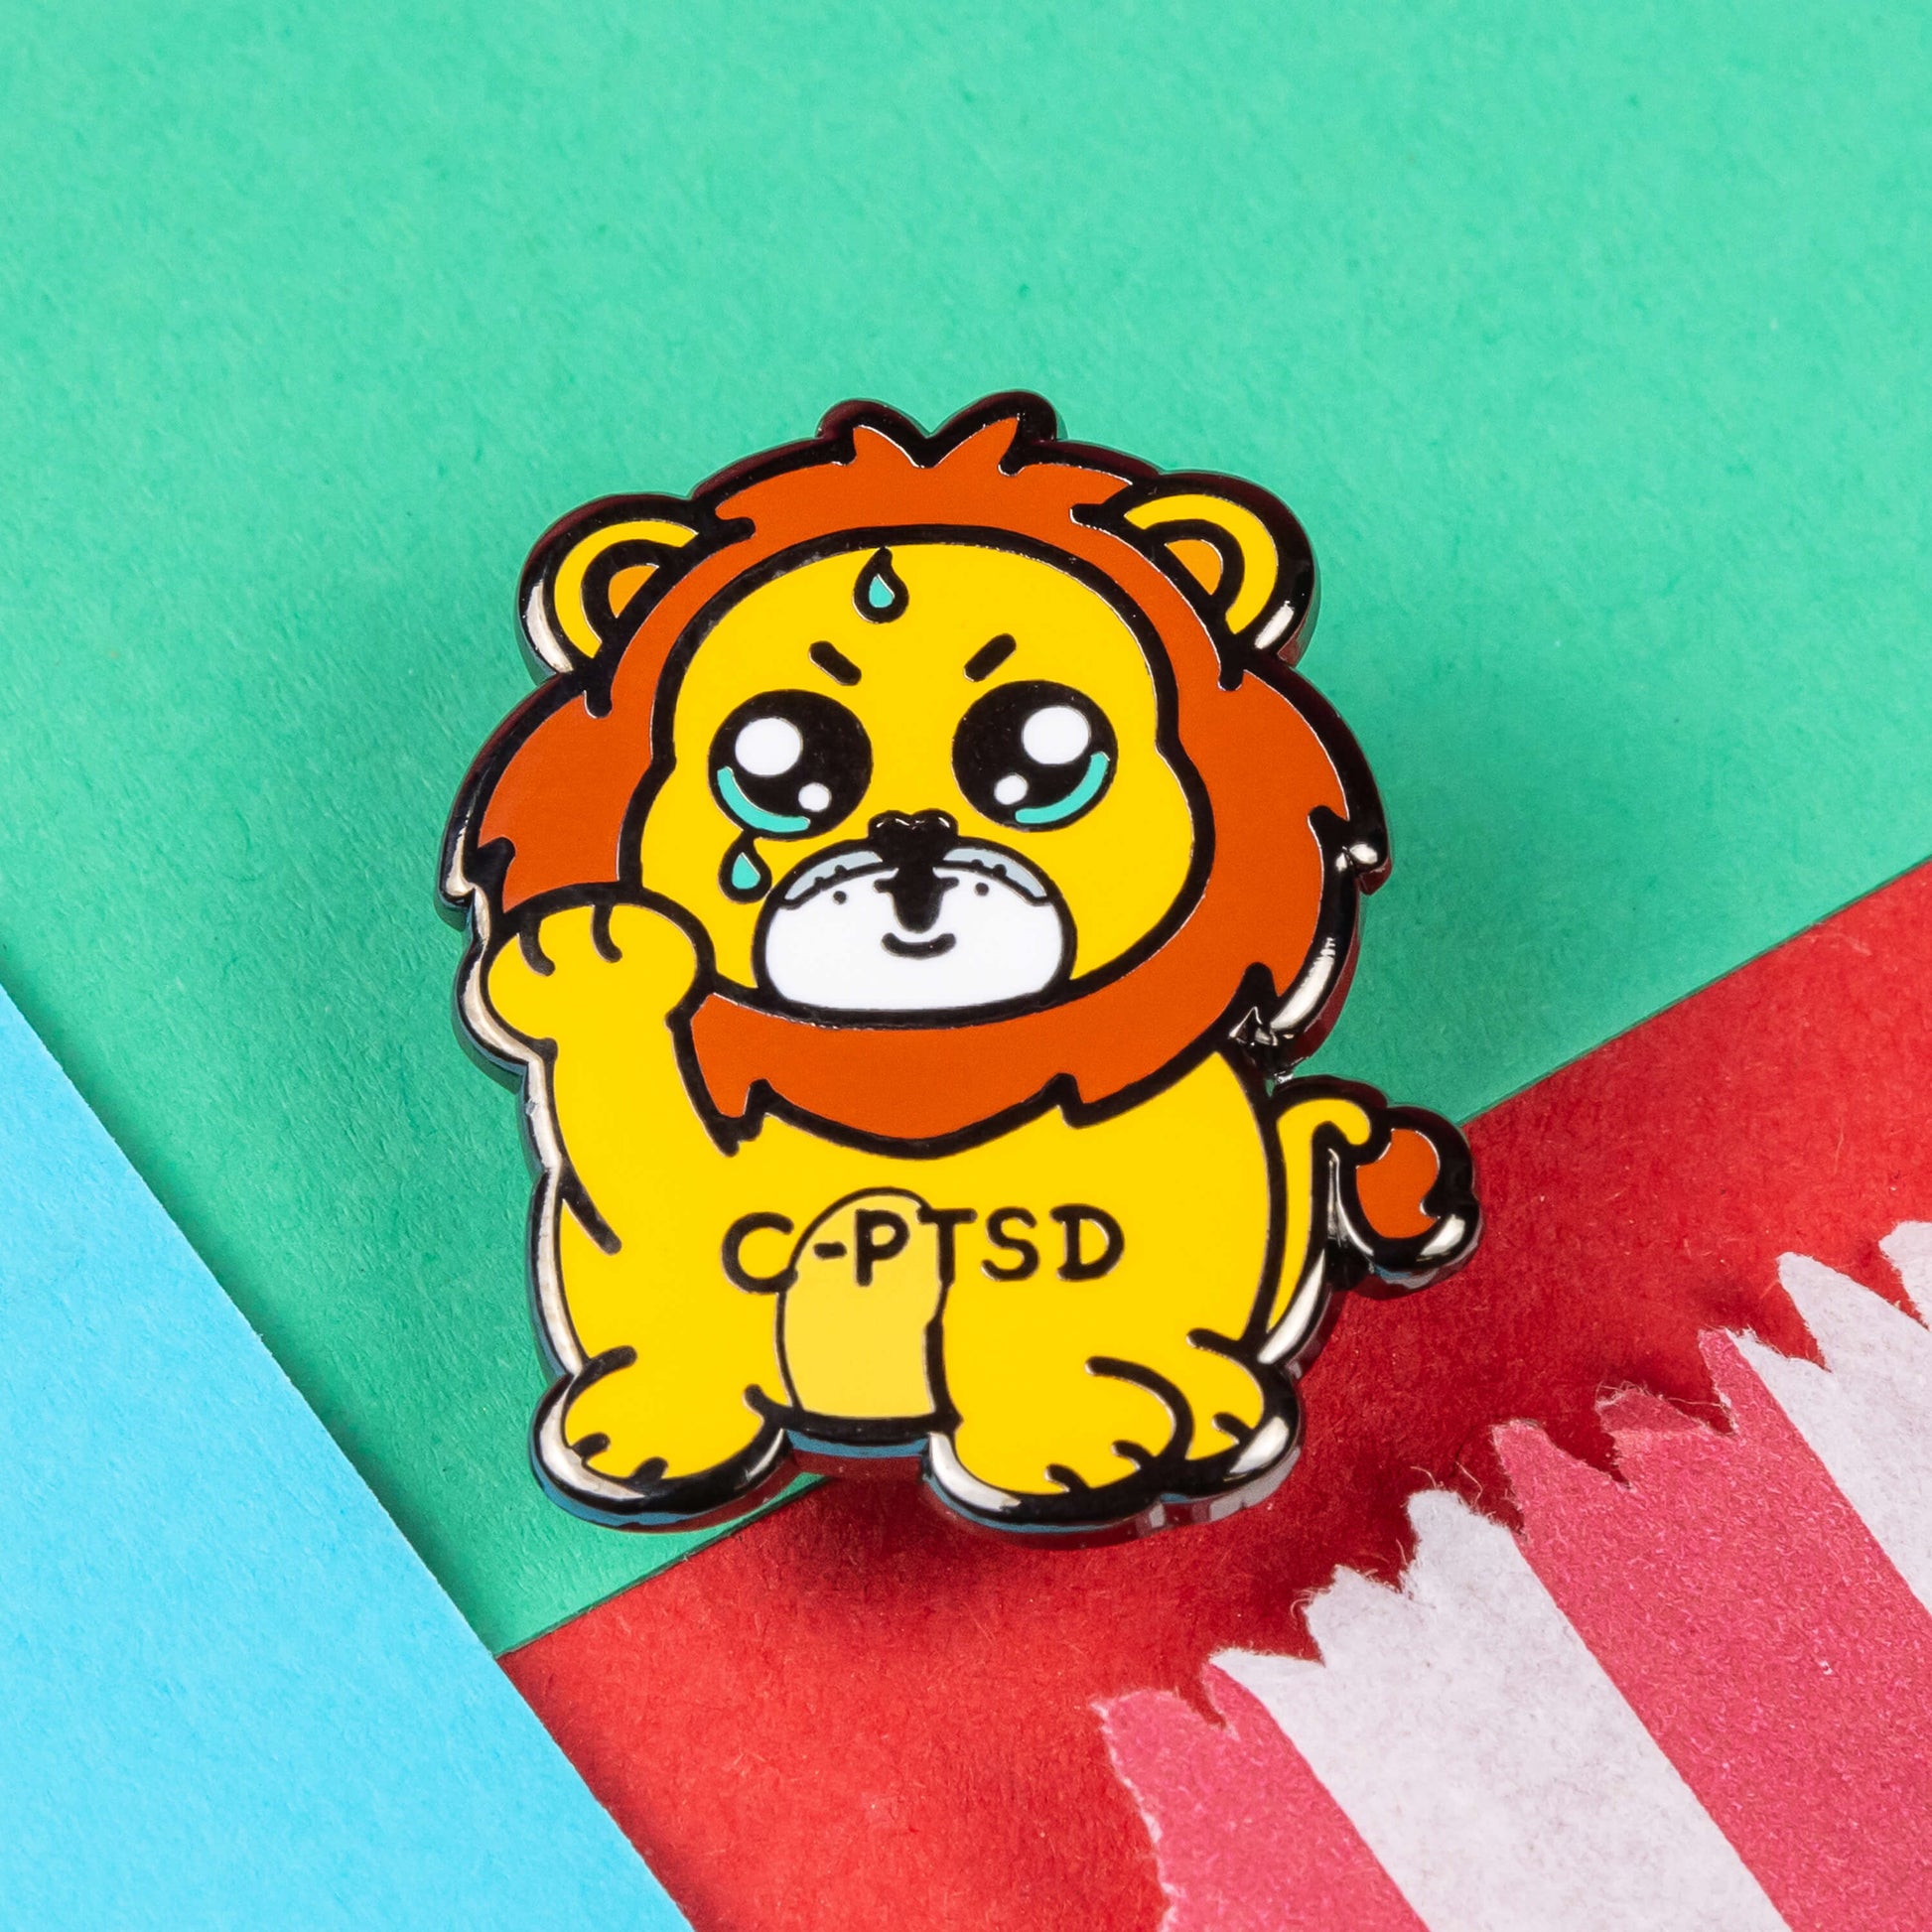 The Complex Post Troarmatic Stress Disorder Lion Enamel Pin - C-PTSD - Complex Post Traumatic Stress Disorder on a red, blue and green card background. A yellow crying smiling and sweating male lion with its paw raised in the middle with 'C-PTSD' across its chest. The enamel pin design is raising awareness for complex post traumatic stress disorder.